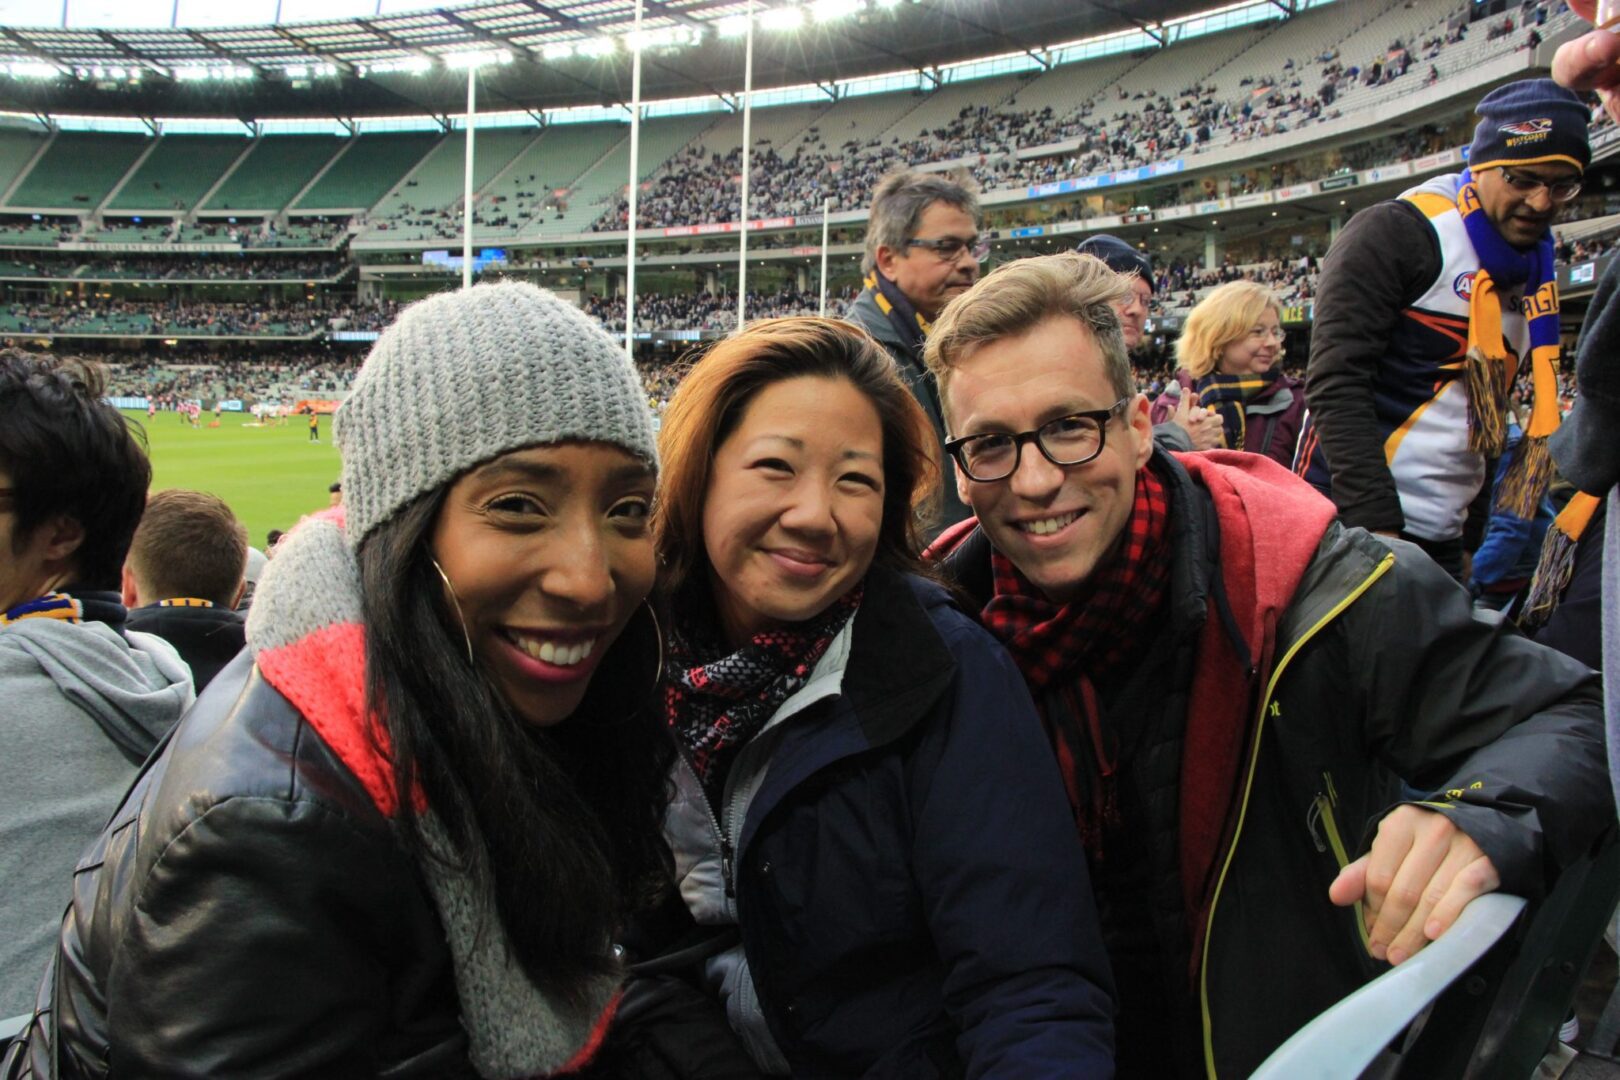 Three people posing for a photo at an afl game.